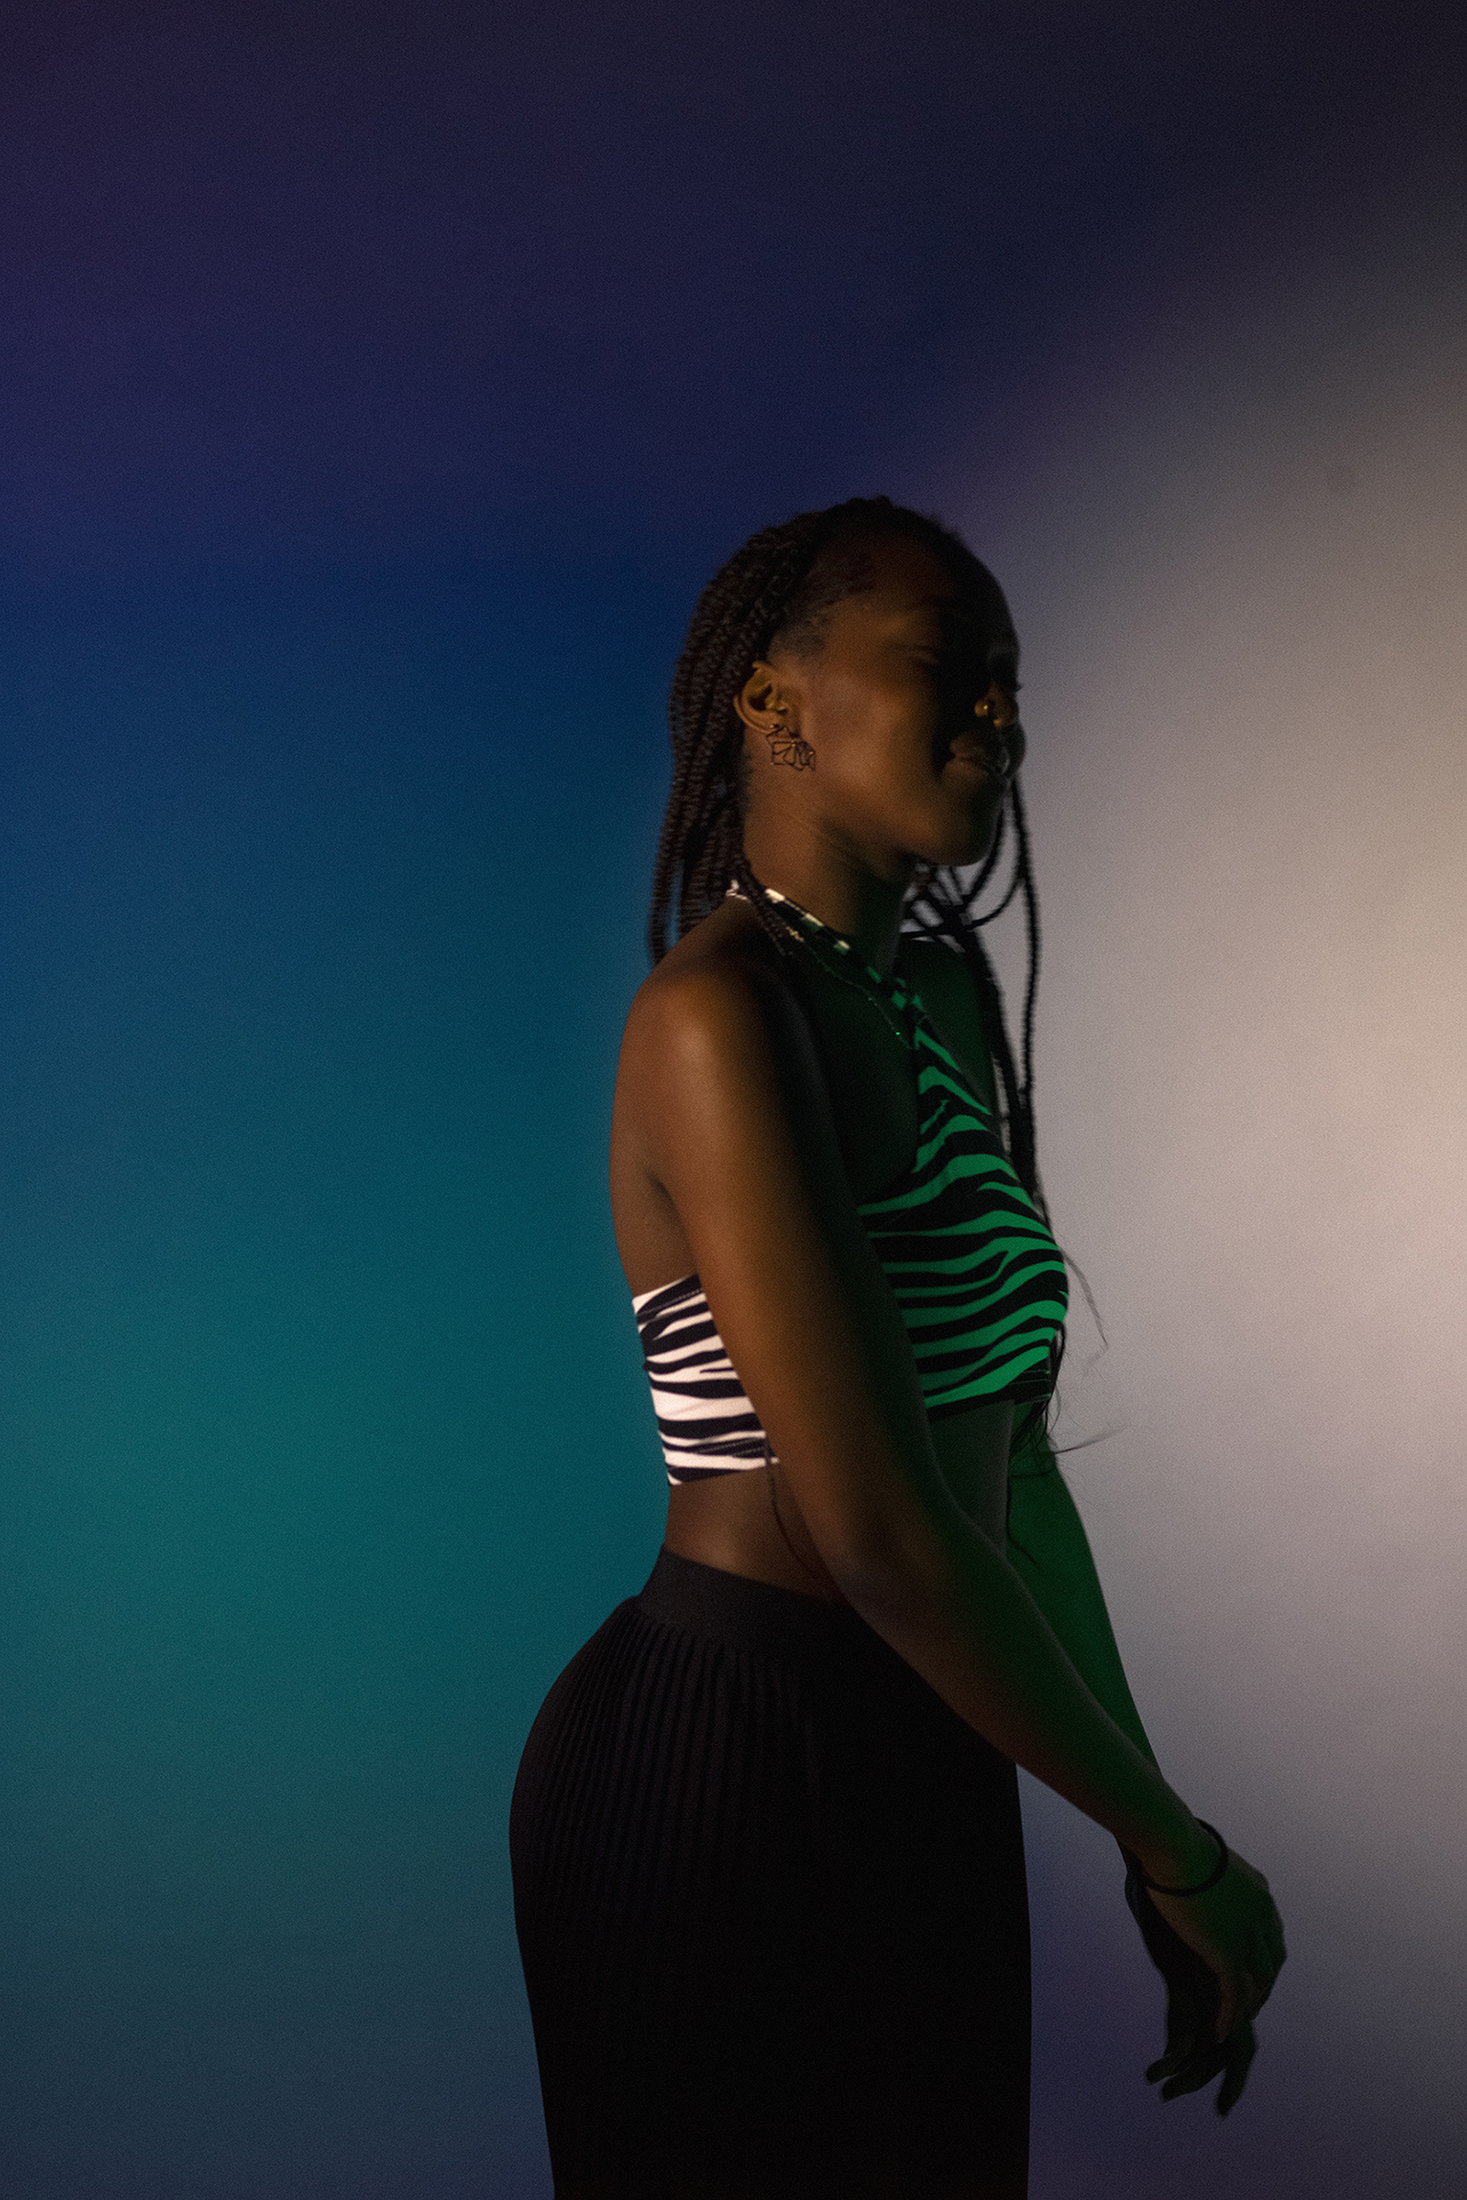 A shadowy portrait of a black woman wearing a zebra print top. She stands in front of a turquoise-to-white gradient background; green light illuminates her body.